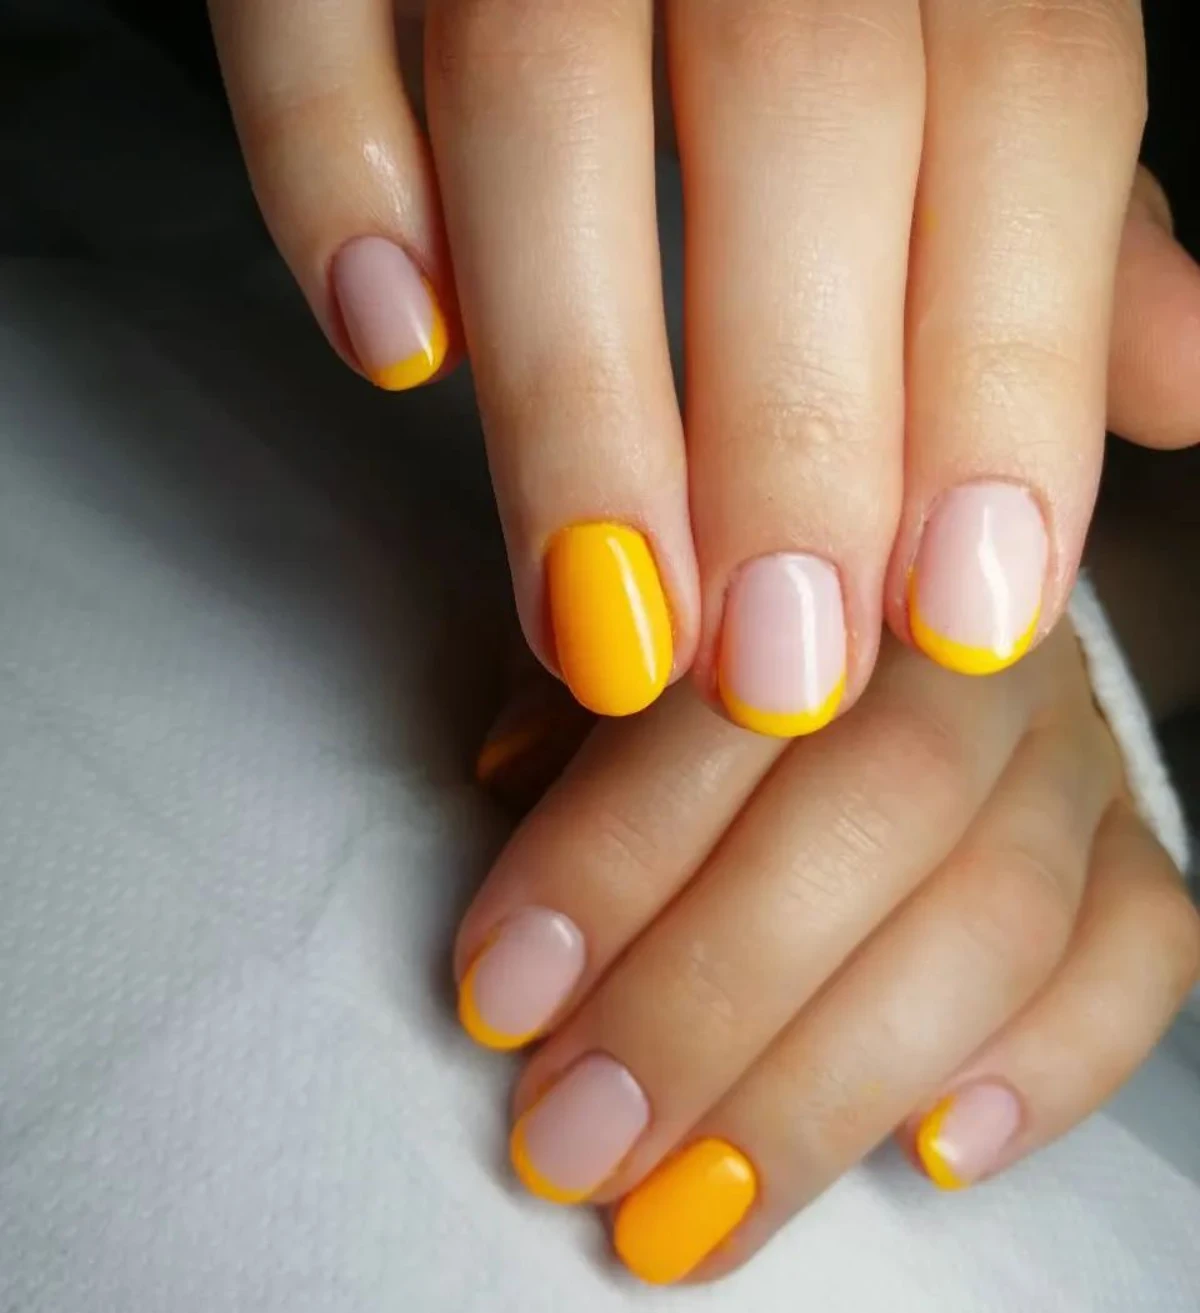 1680979176 630 These are the nail polish trends for summer 2023 that.webp - These are the nail polish trends for summer 2023 that are IN!